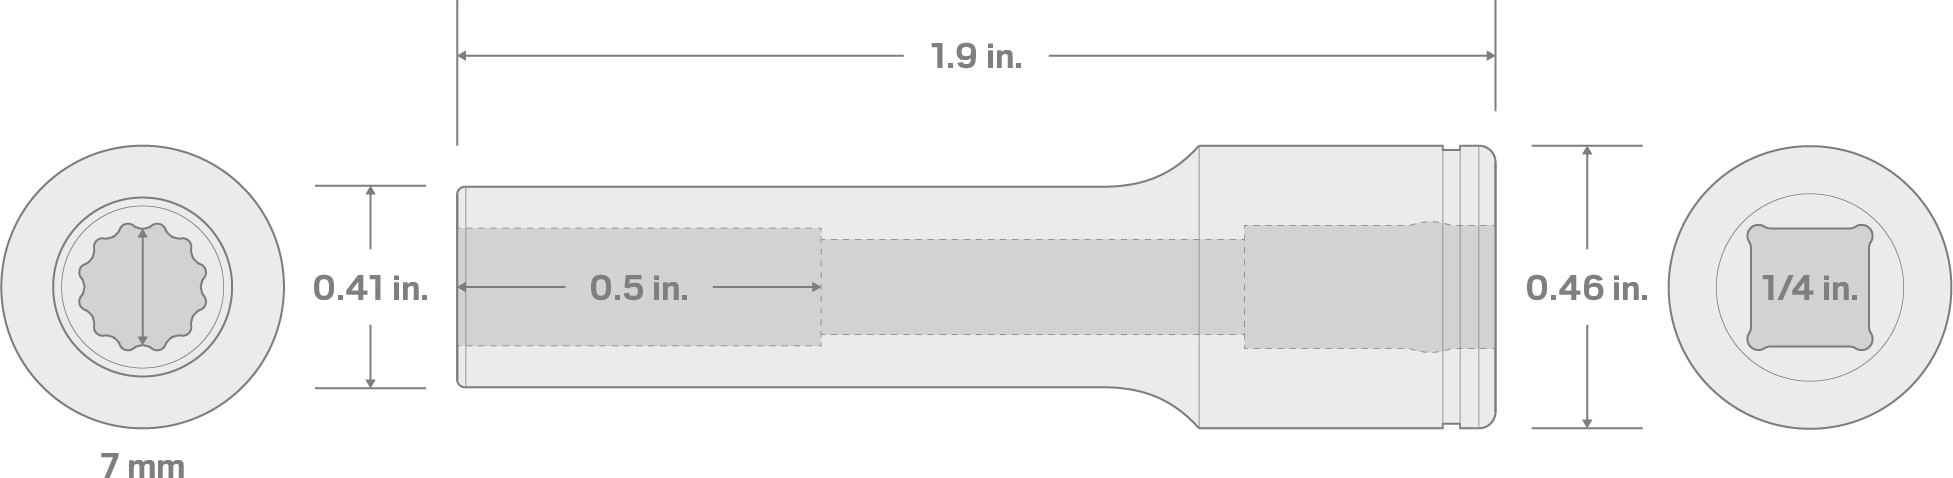 Specs for 1/4 Inch Drive x 7 mm Deep 12-Point Socket